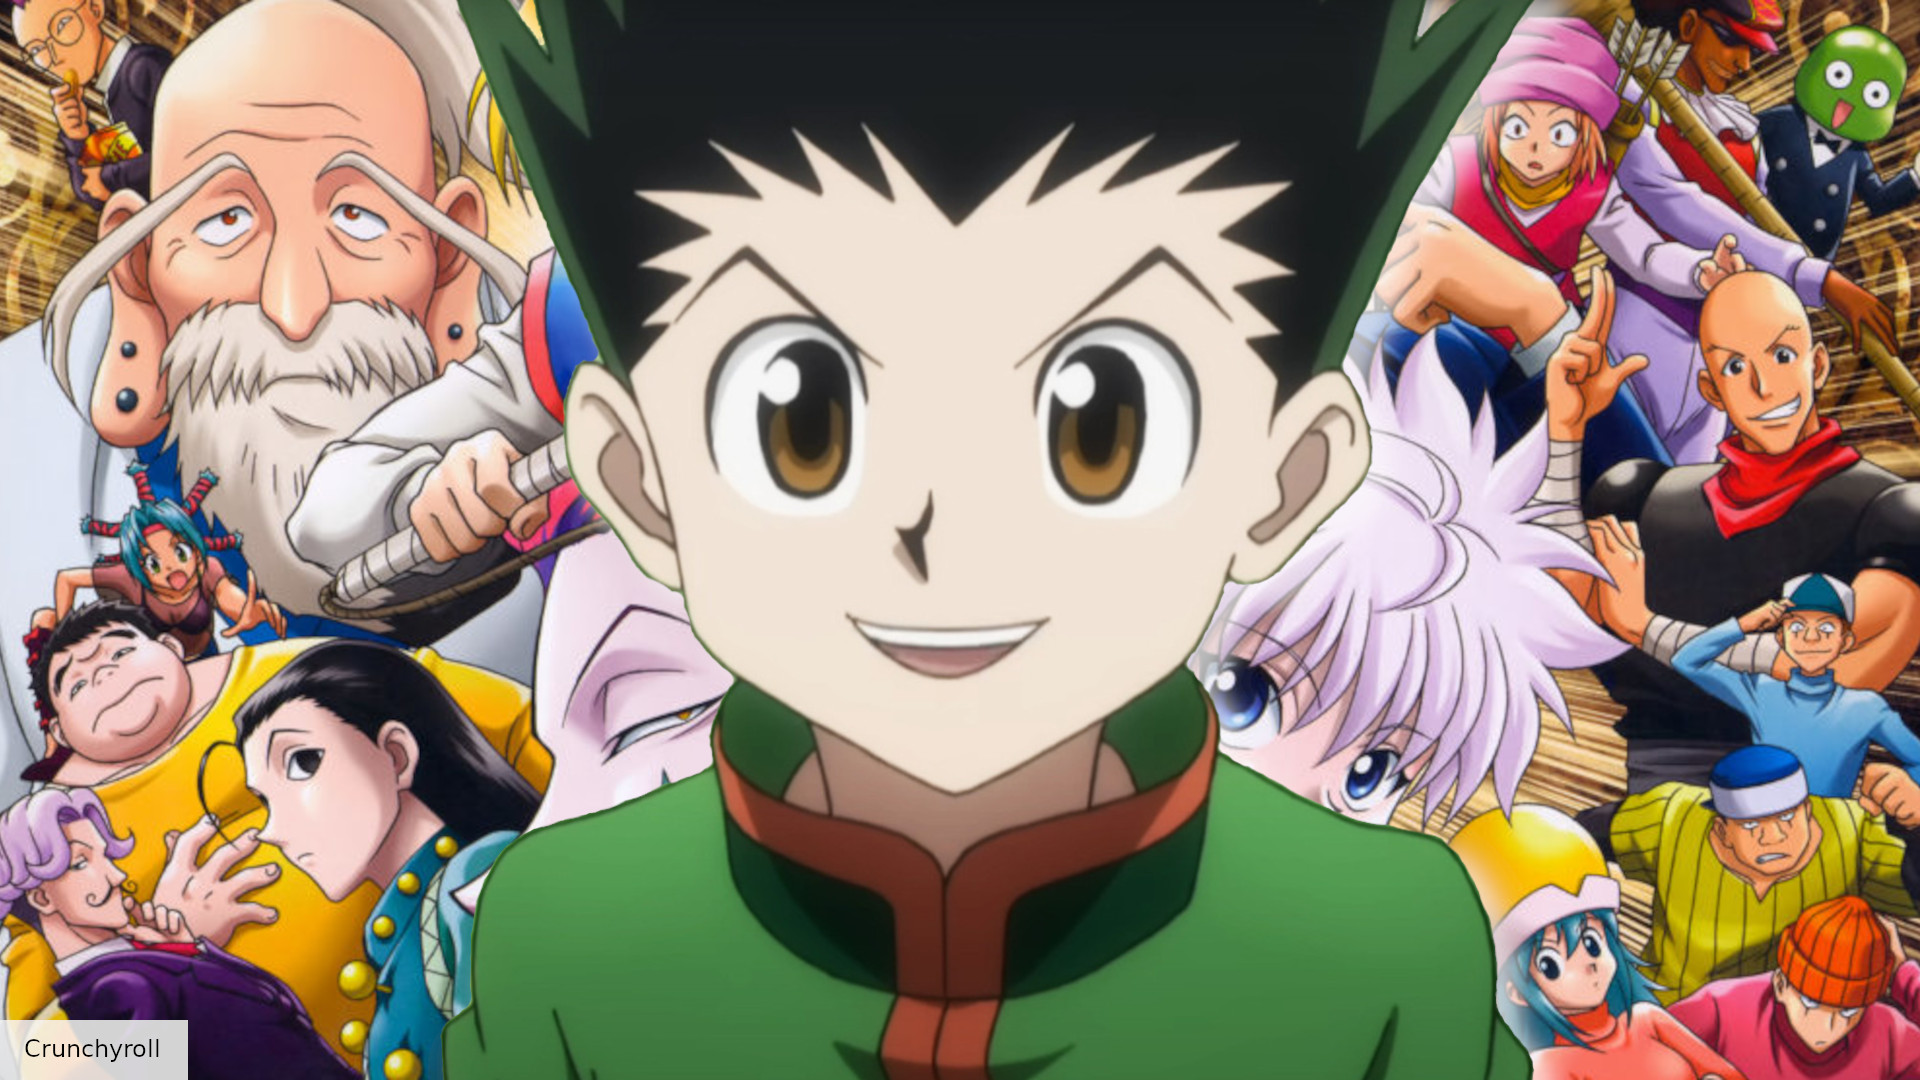 Gon Workout Routine Train like The Young Hunter from Hunter x Hunter